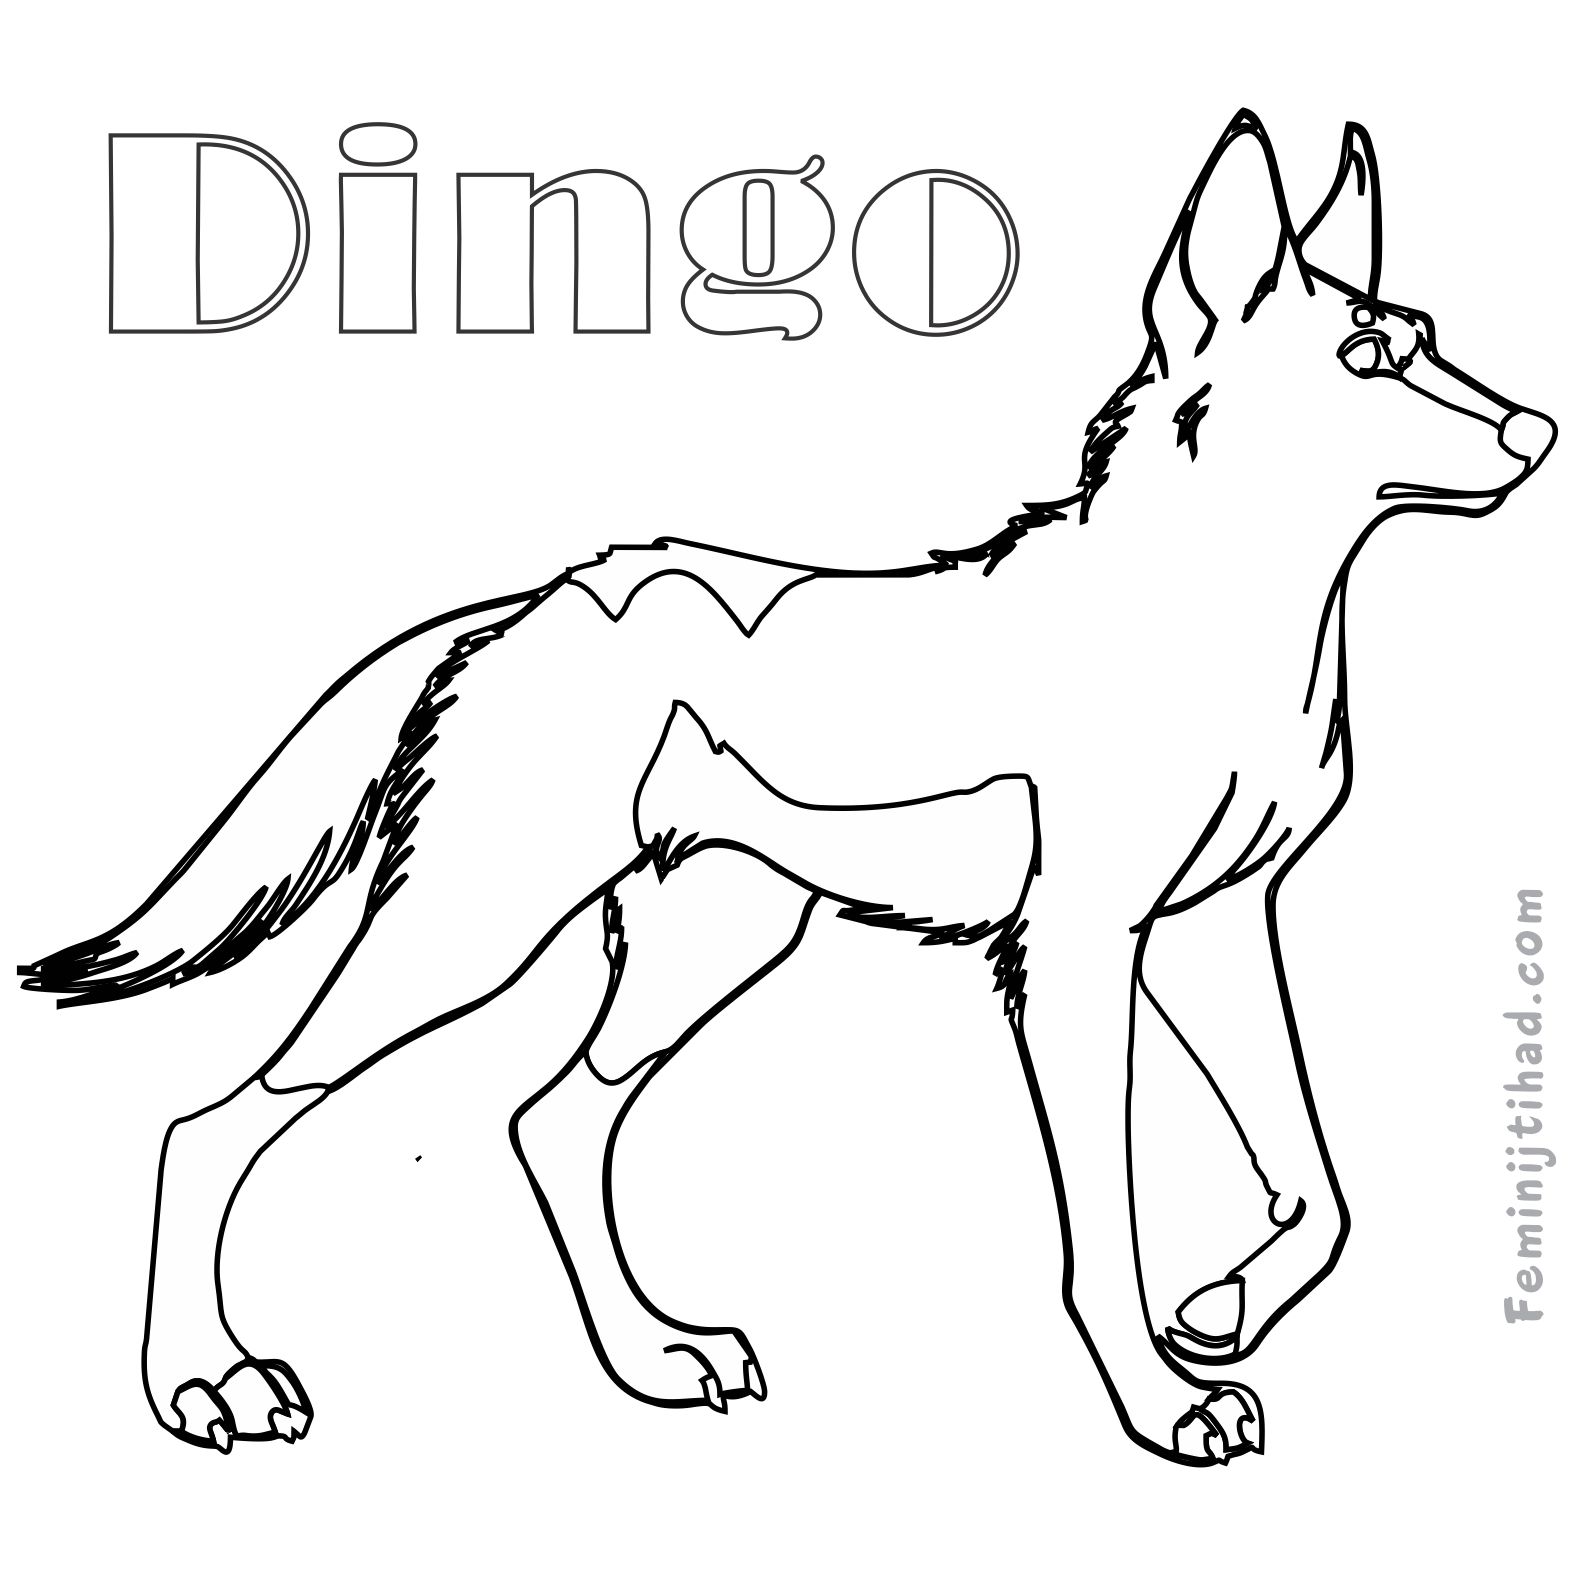 coloring page of a dingo to print